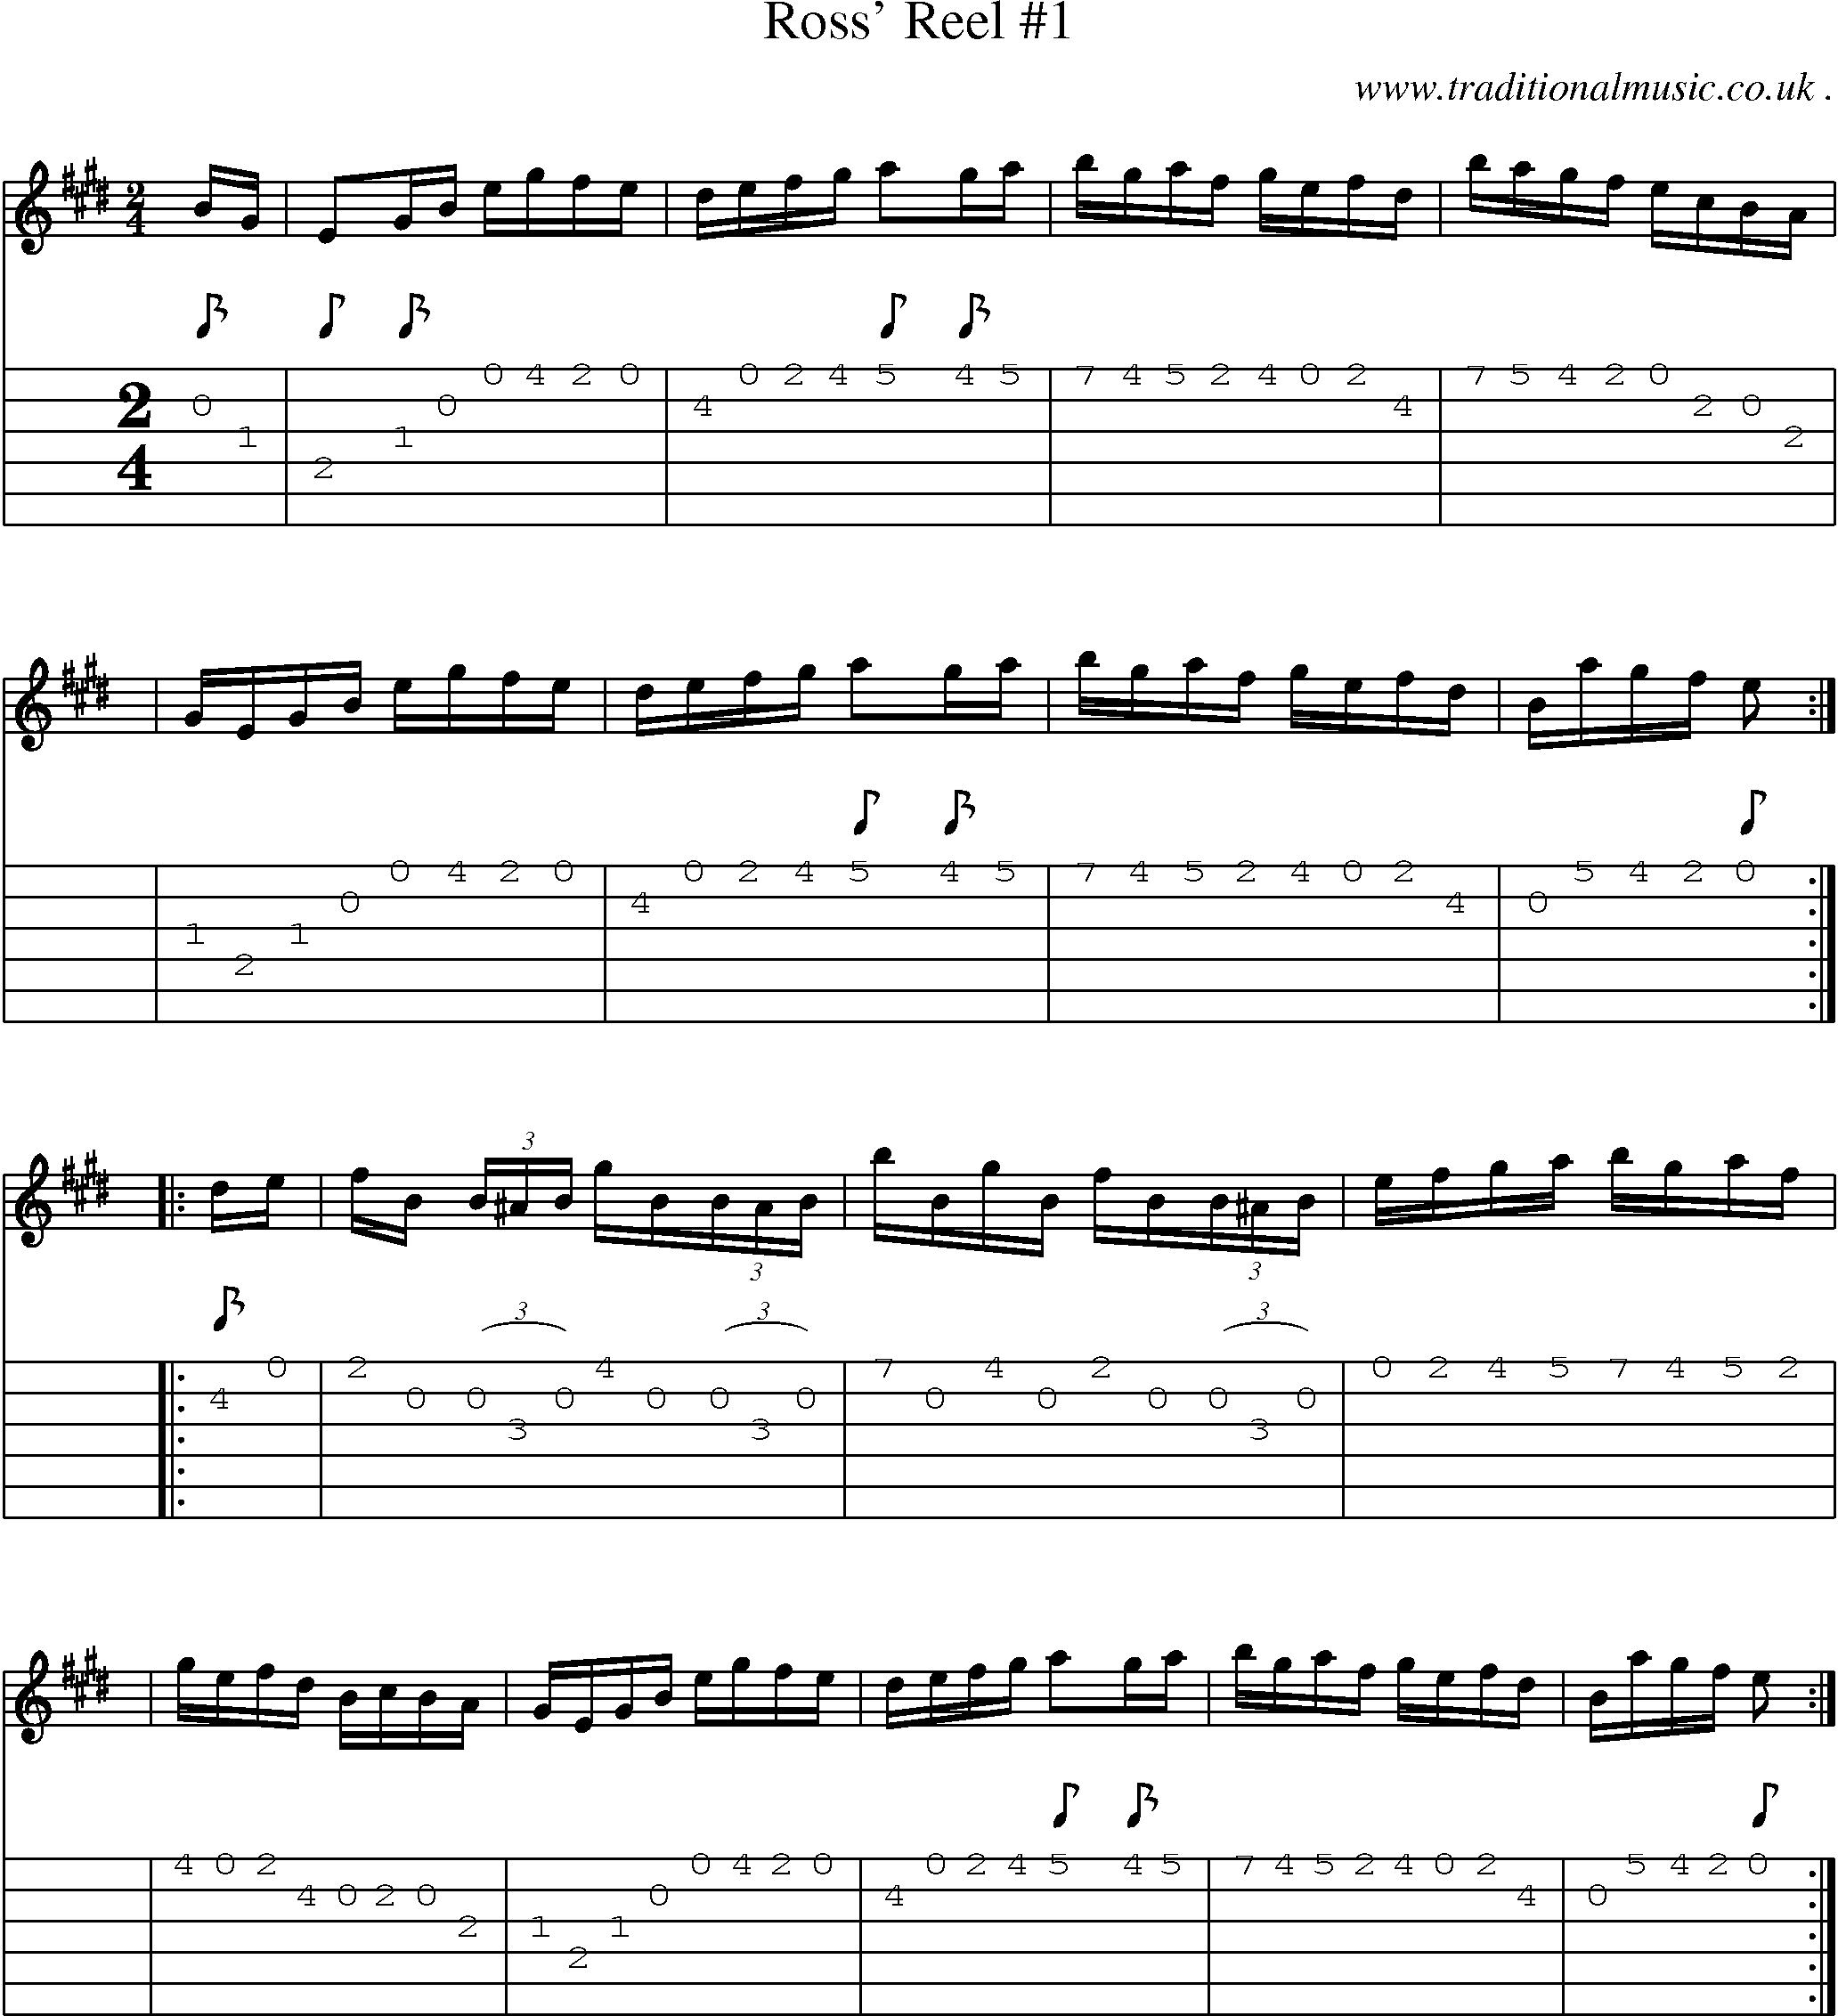 Sheet-music  score, Chords and Guitar Tabs for Ross Reel 1